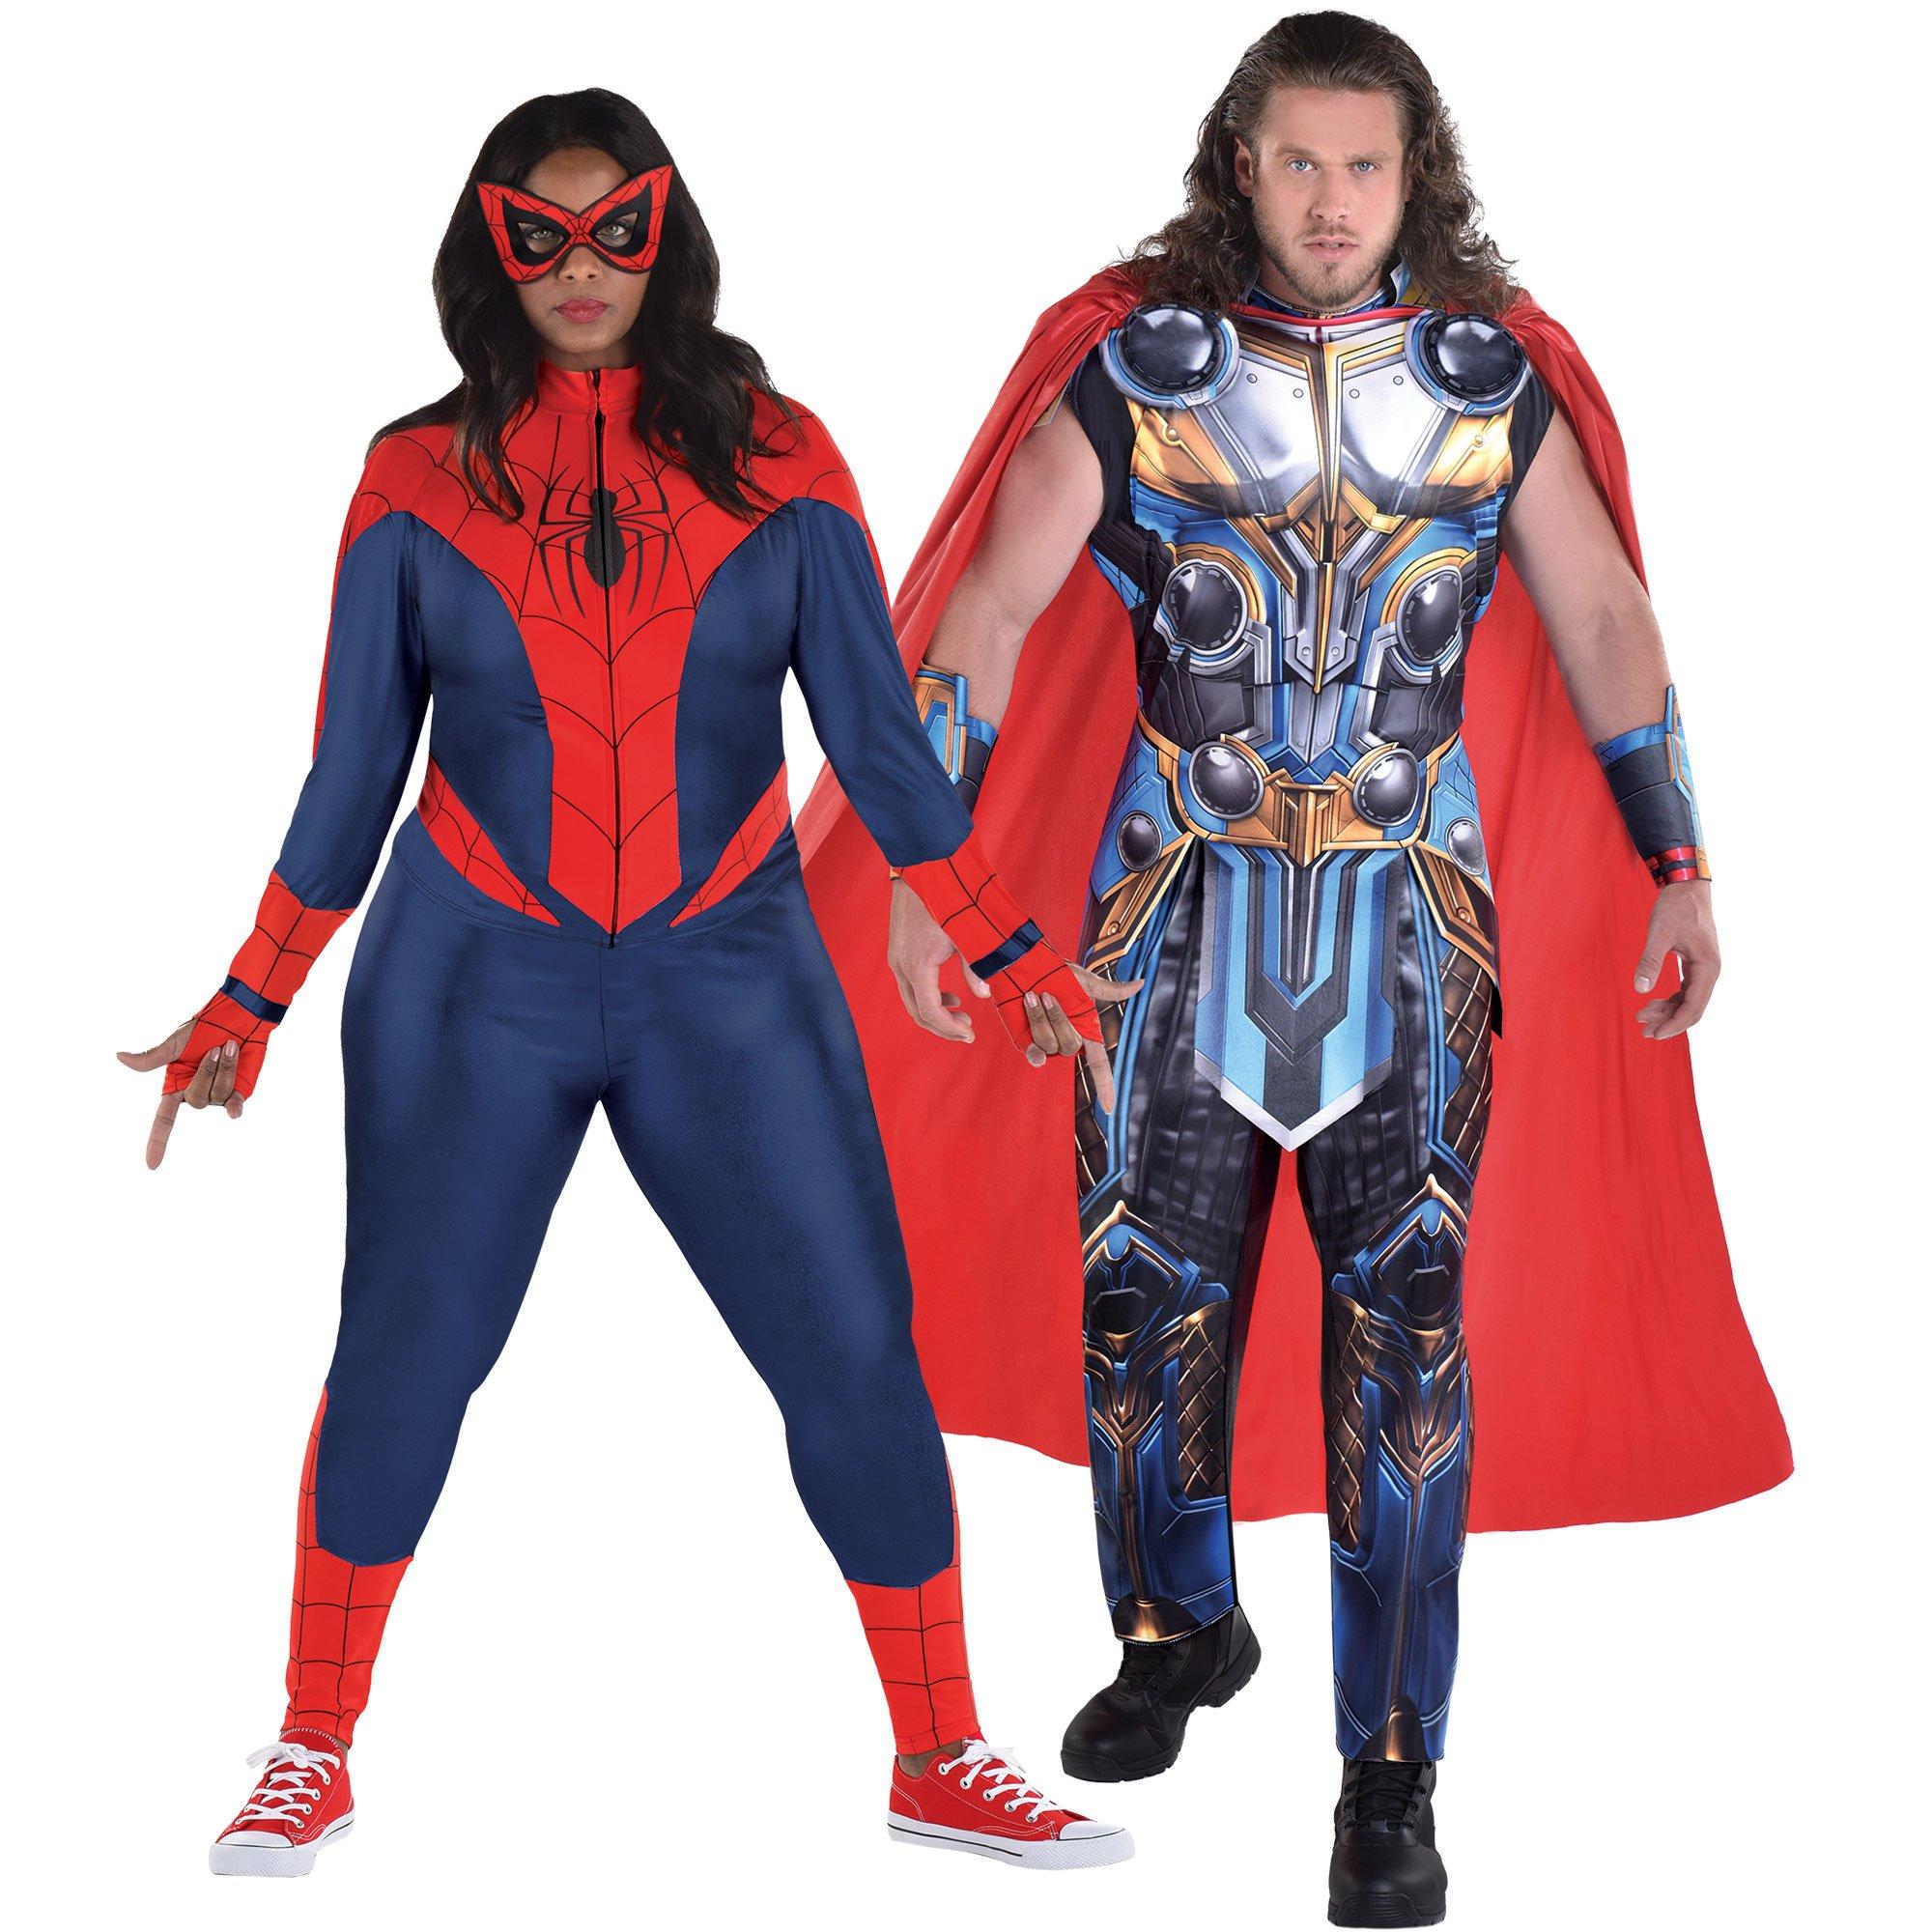 Marvel Avengers Family Costumes | Party City